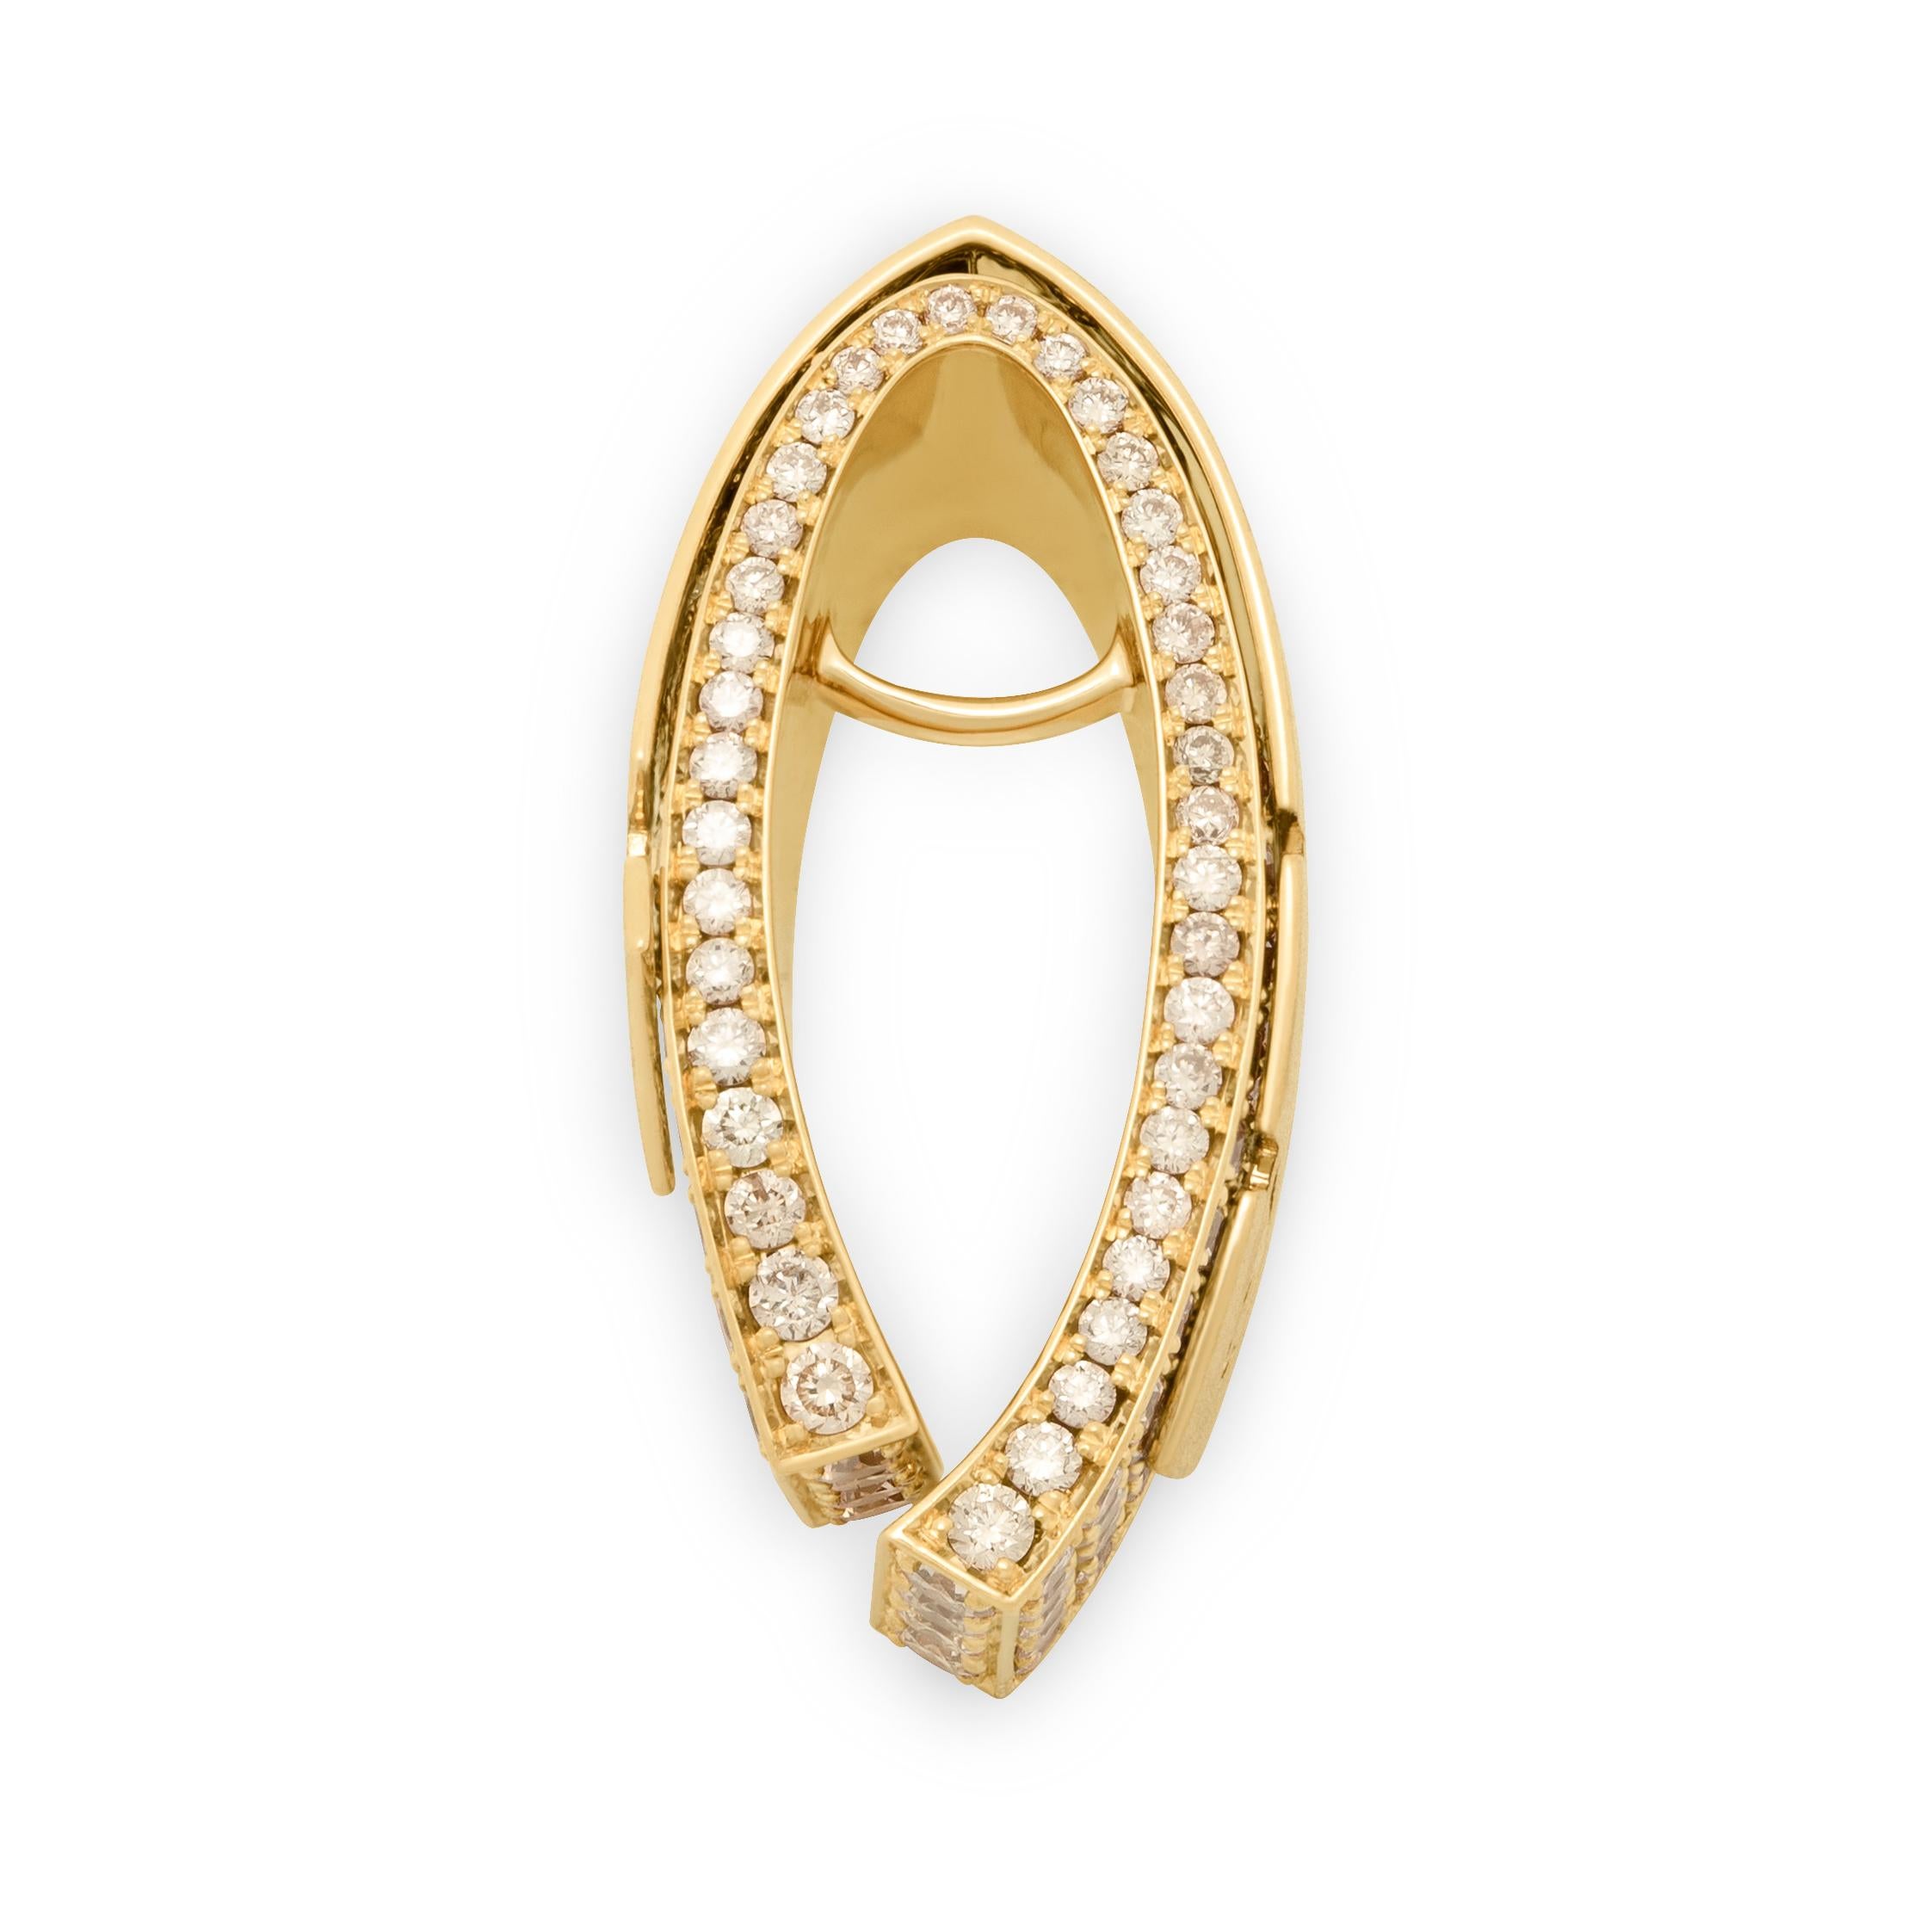 Champagne Diamonds 18 Karat Yellow Gold Pret-a-Porter Pendant

Veil inspired this jewelry series by our designers. For example, this Pendant seems to have two layers. The first layer is a 